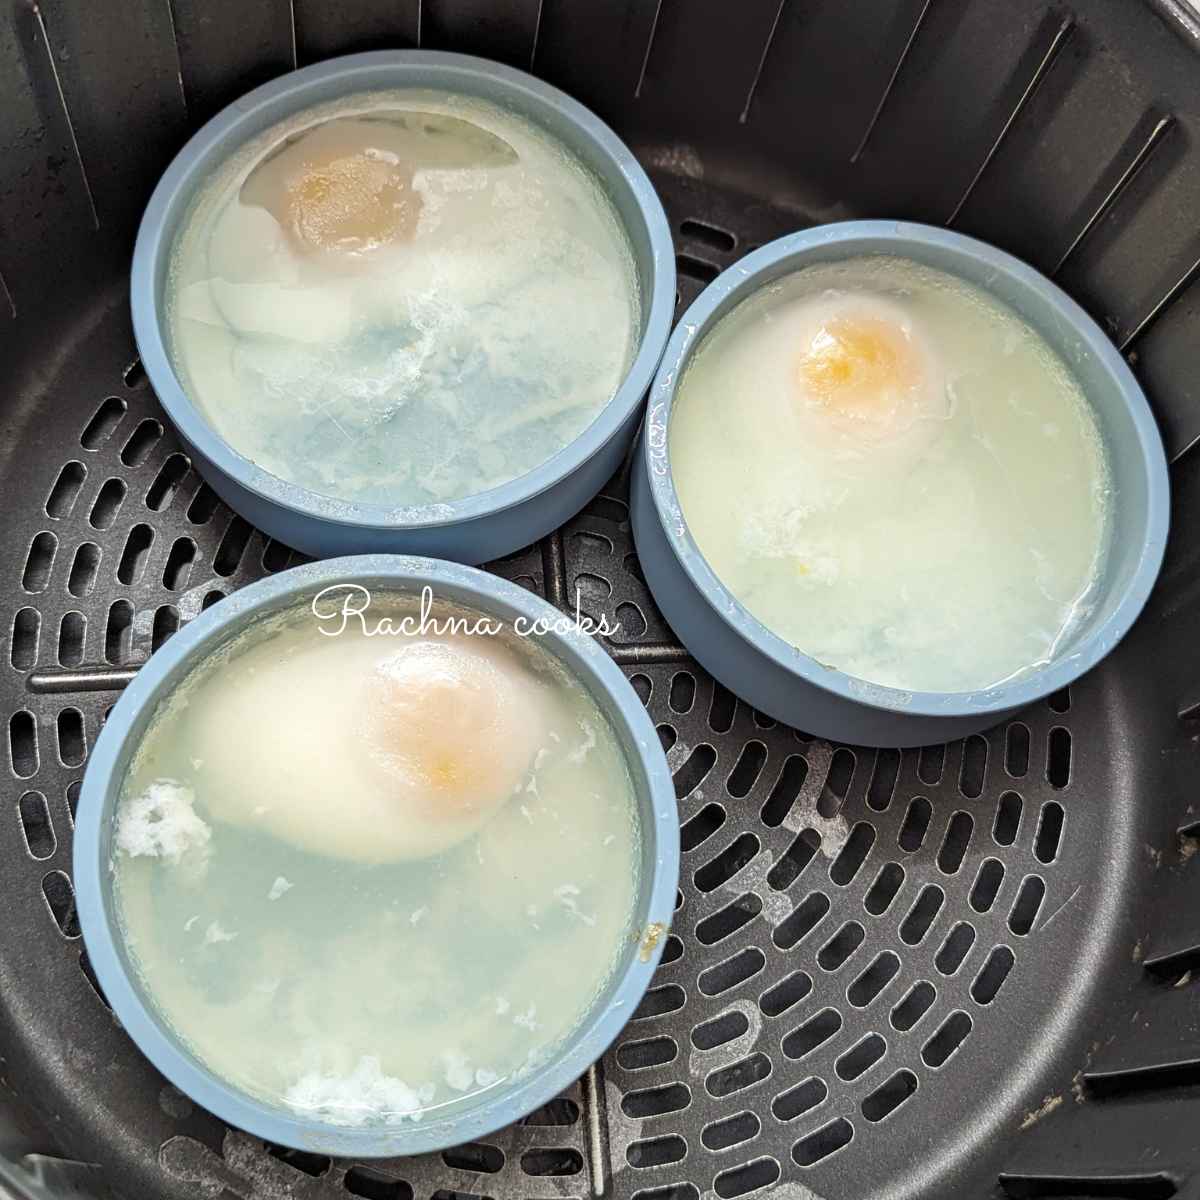 Poached eggs is silicone molds after air fryer basket.